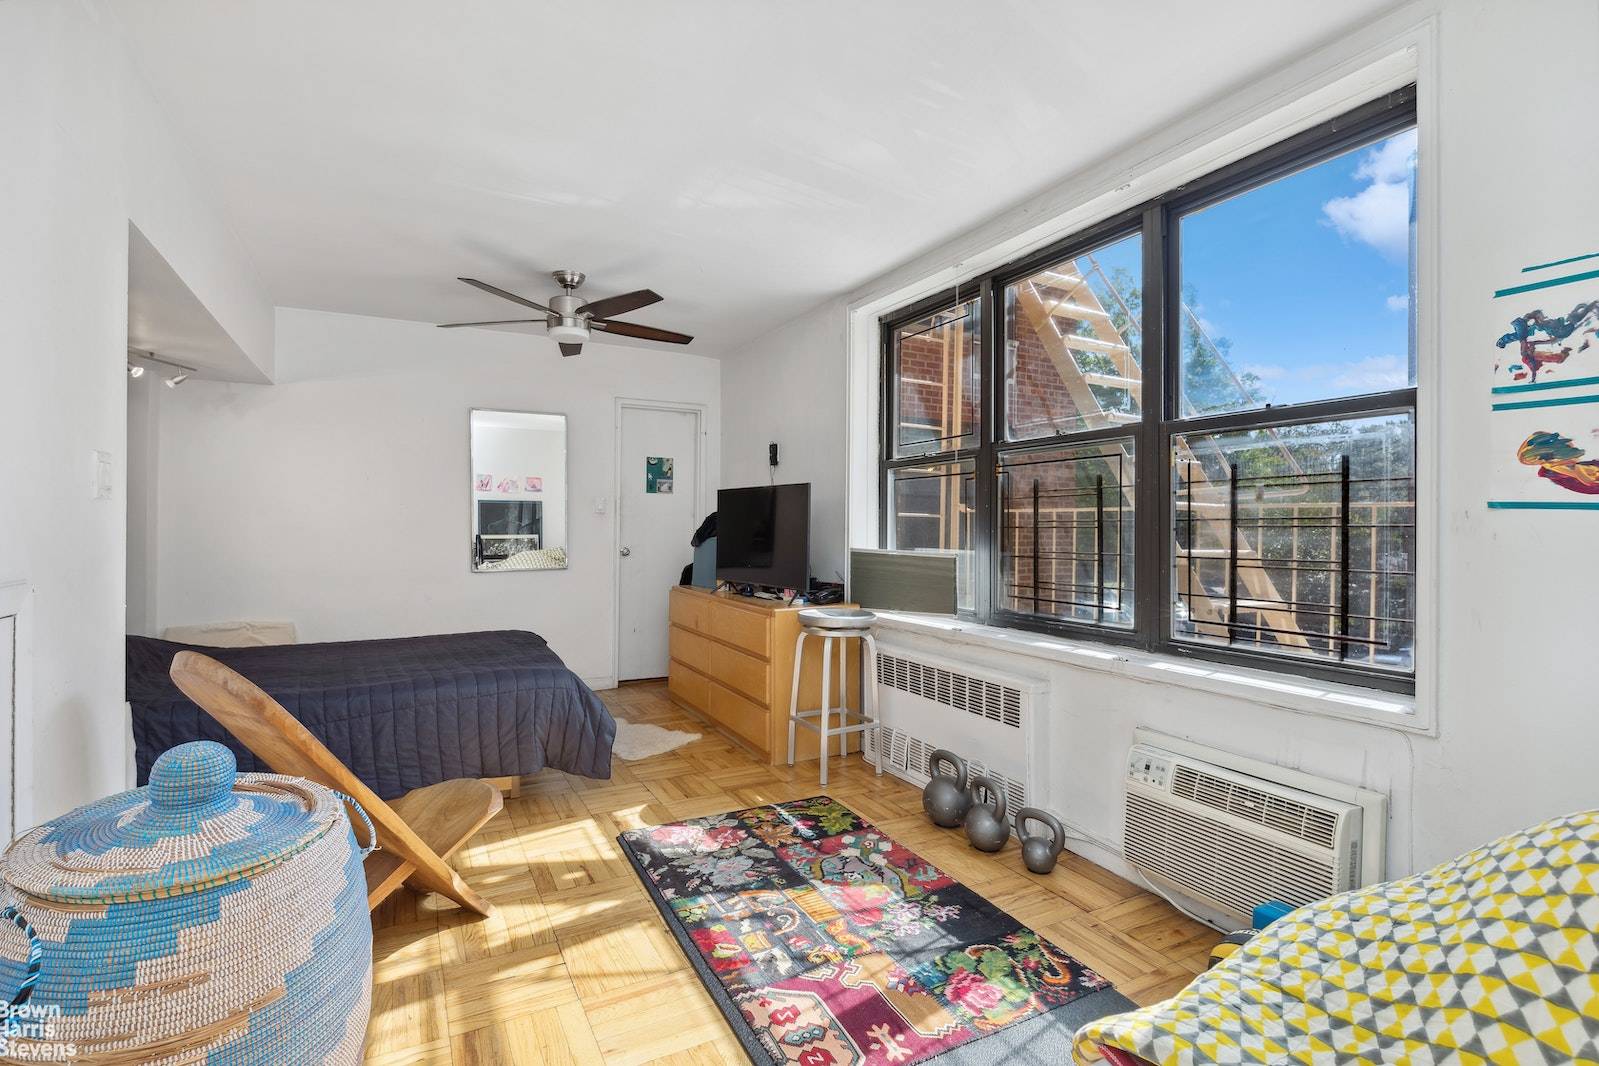 Welcome to 185 Prospect Park Southwest located across from Prospect Park and in the Heart of Windsor Terrace.